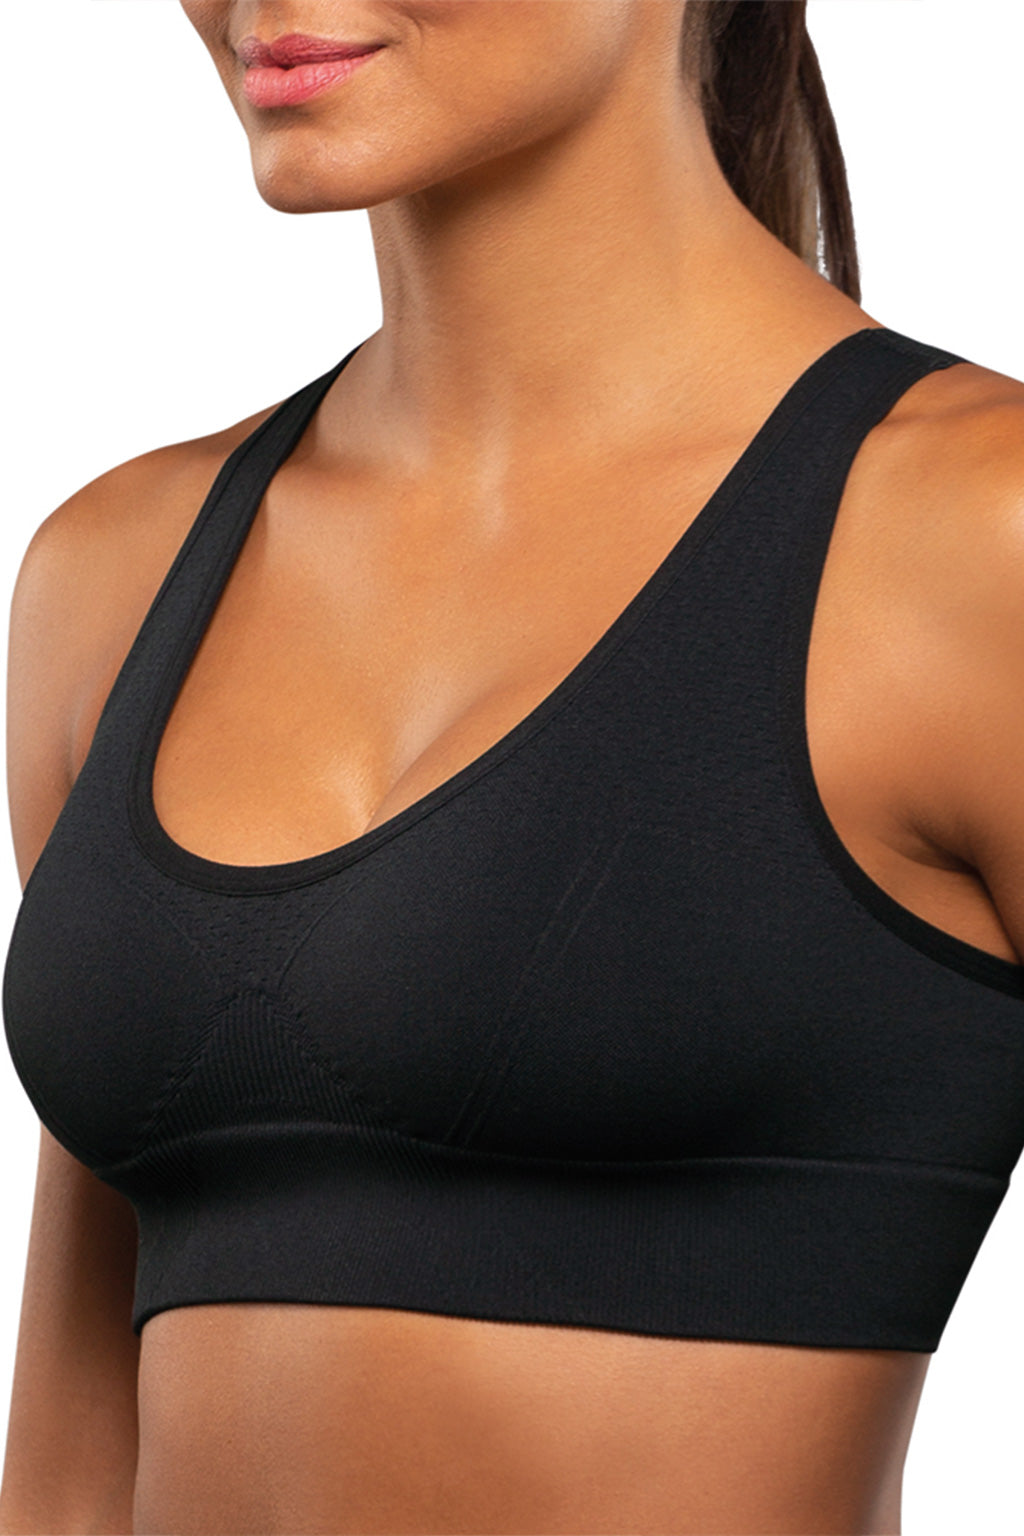 Comfortable Sports Bra and Boyshorts For High-Performance